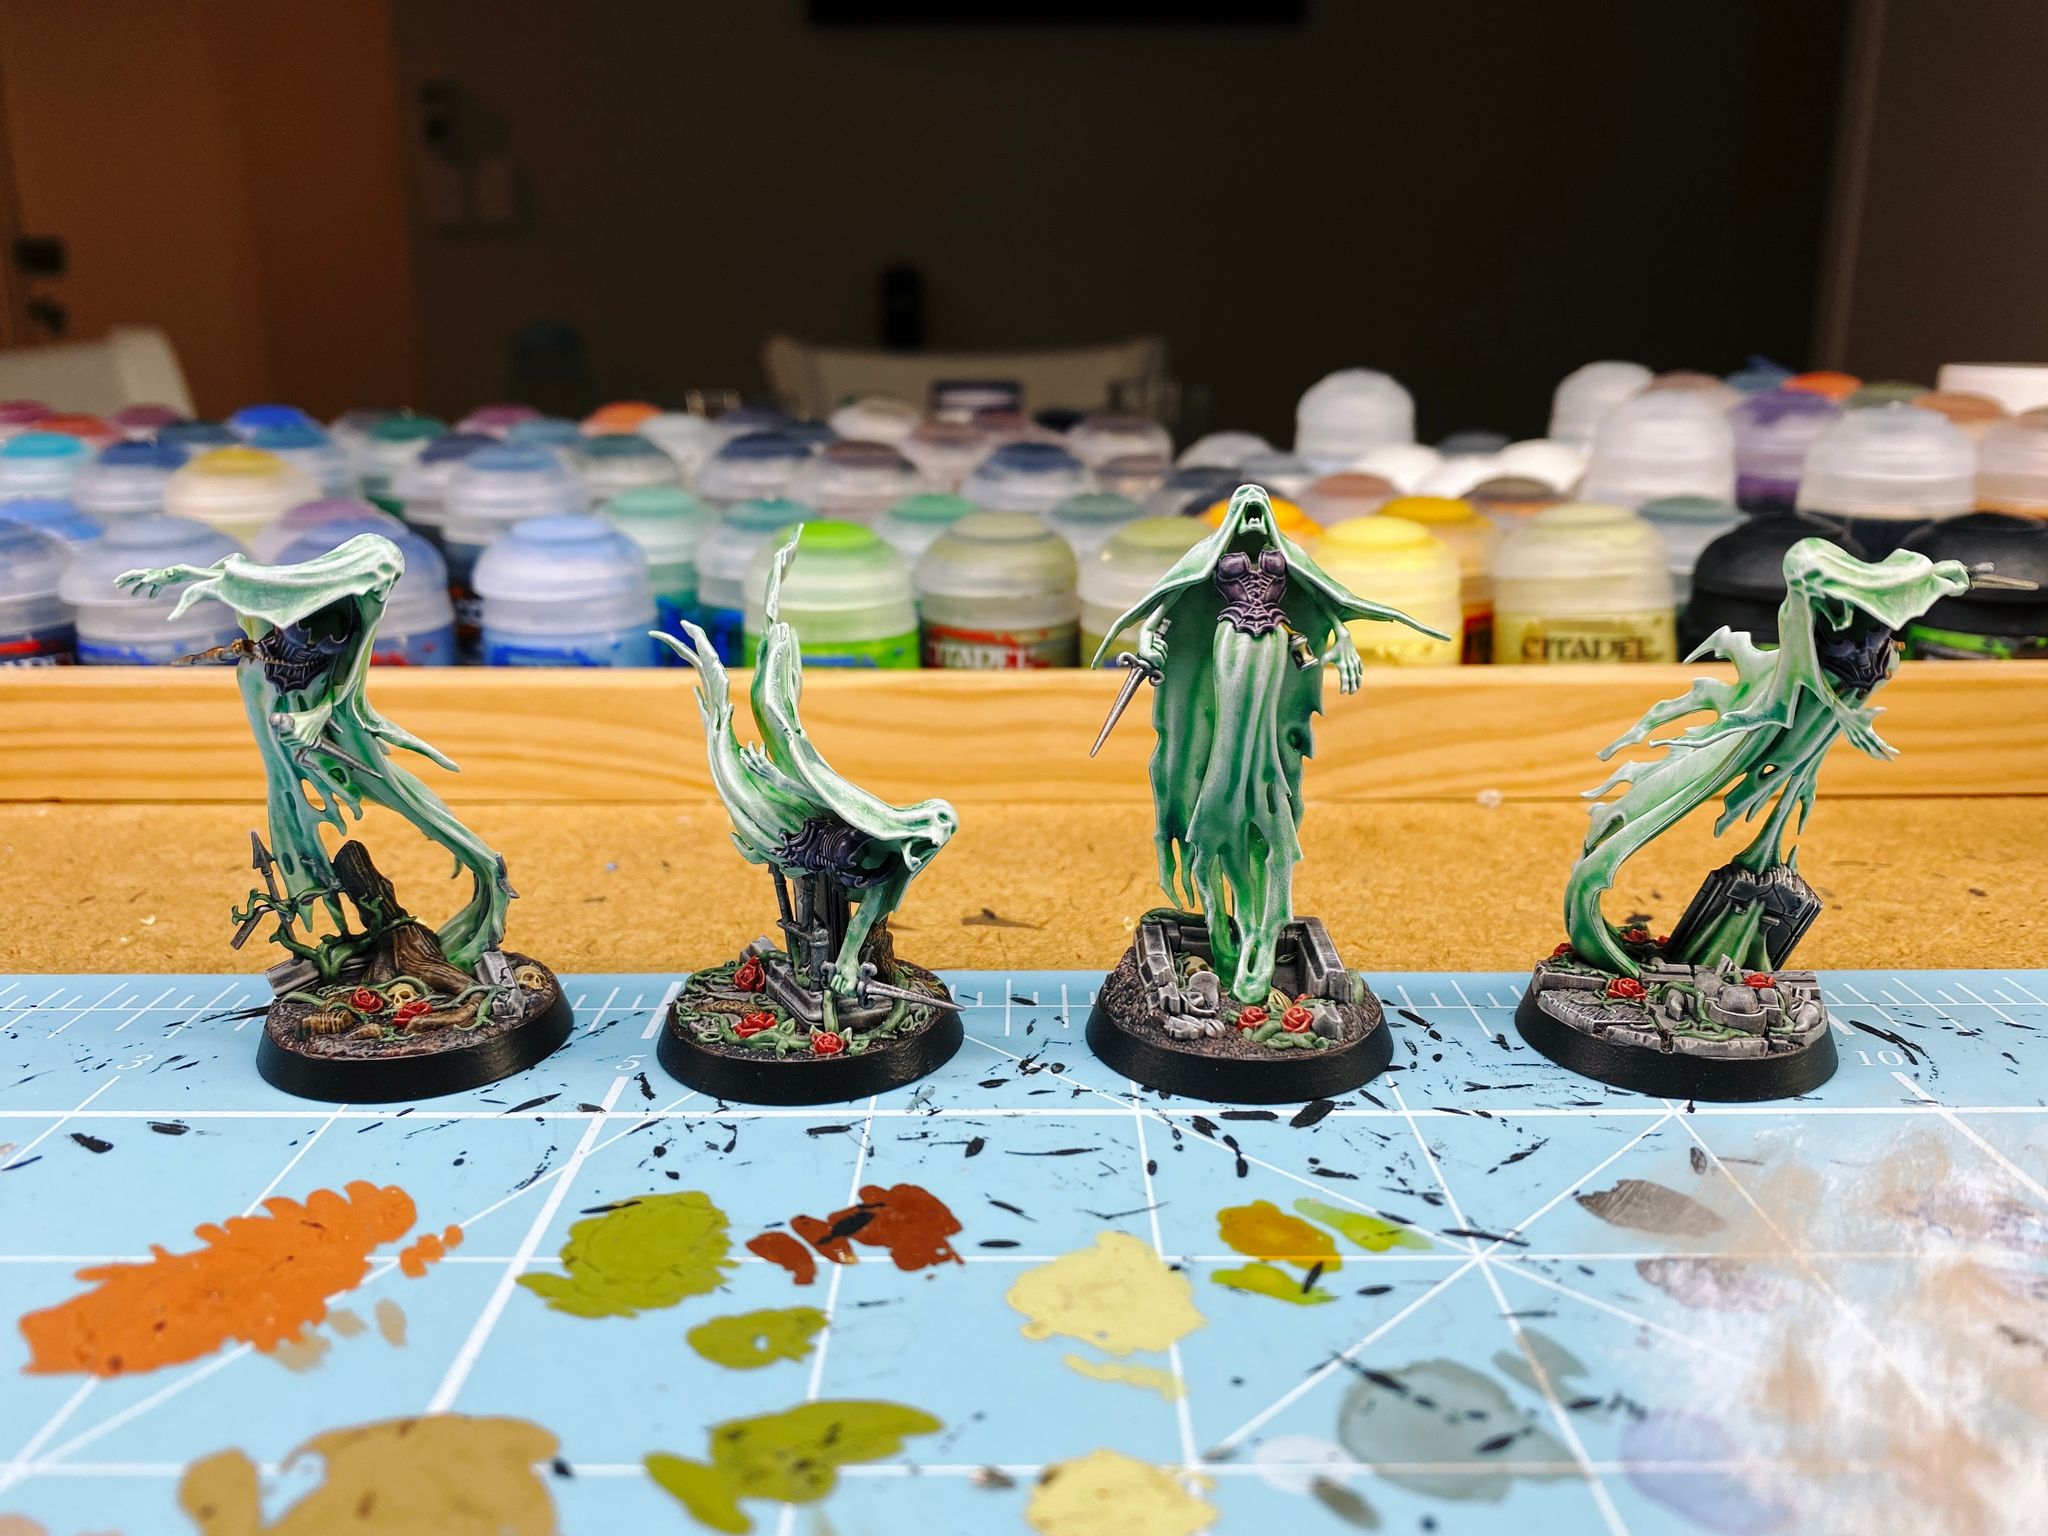 A photo of the four miniatures of Lady Harrow's Mournflight from Warhammer Underworlds. They're spirits and modelled to look like they're very ephemeral and wispy and flowing. The wispy bits are a sickly green colour with a smooth gradient into white at the edges and raised areas, they have deep purple corsets, and the bases look like a ruined graveyard.